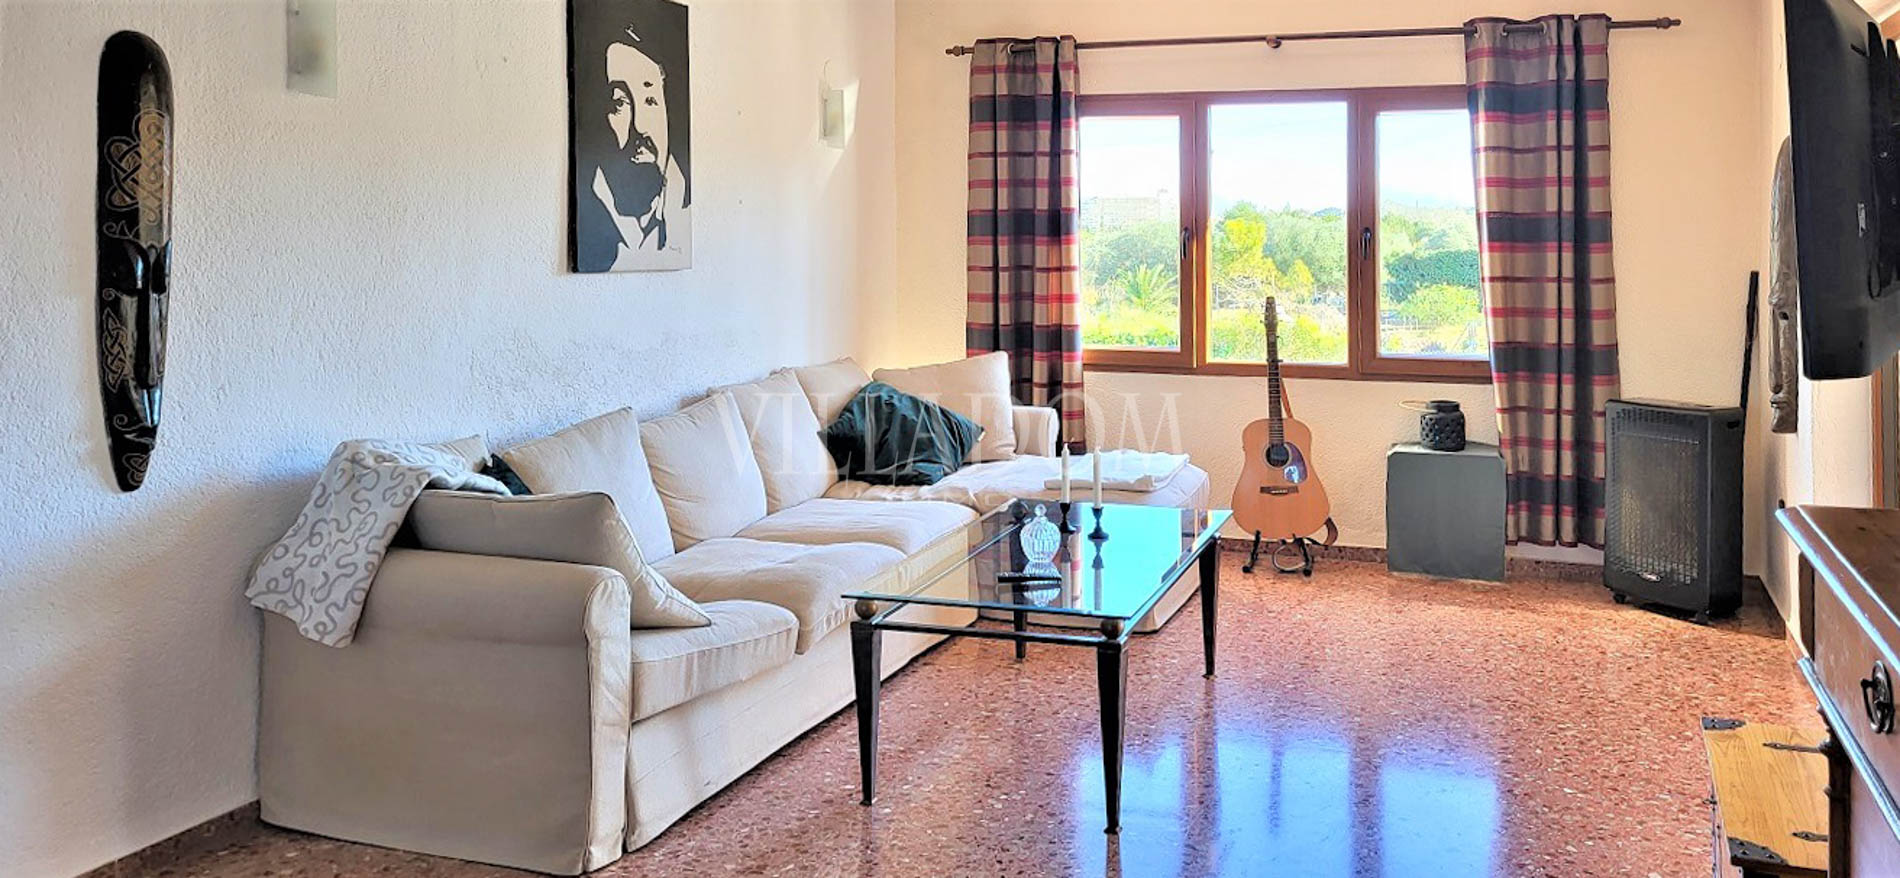 Villa with 6 bedrooms very close to the Arenal beach in Javea